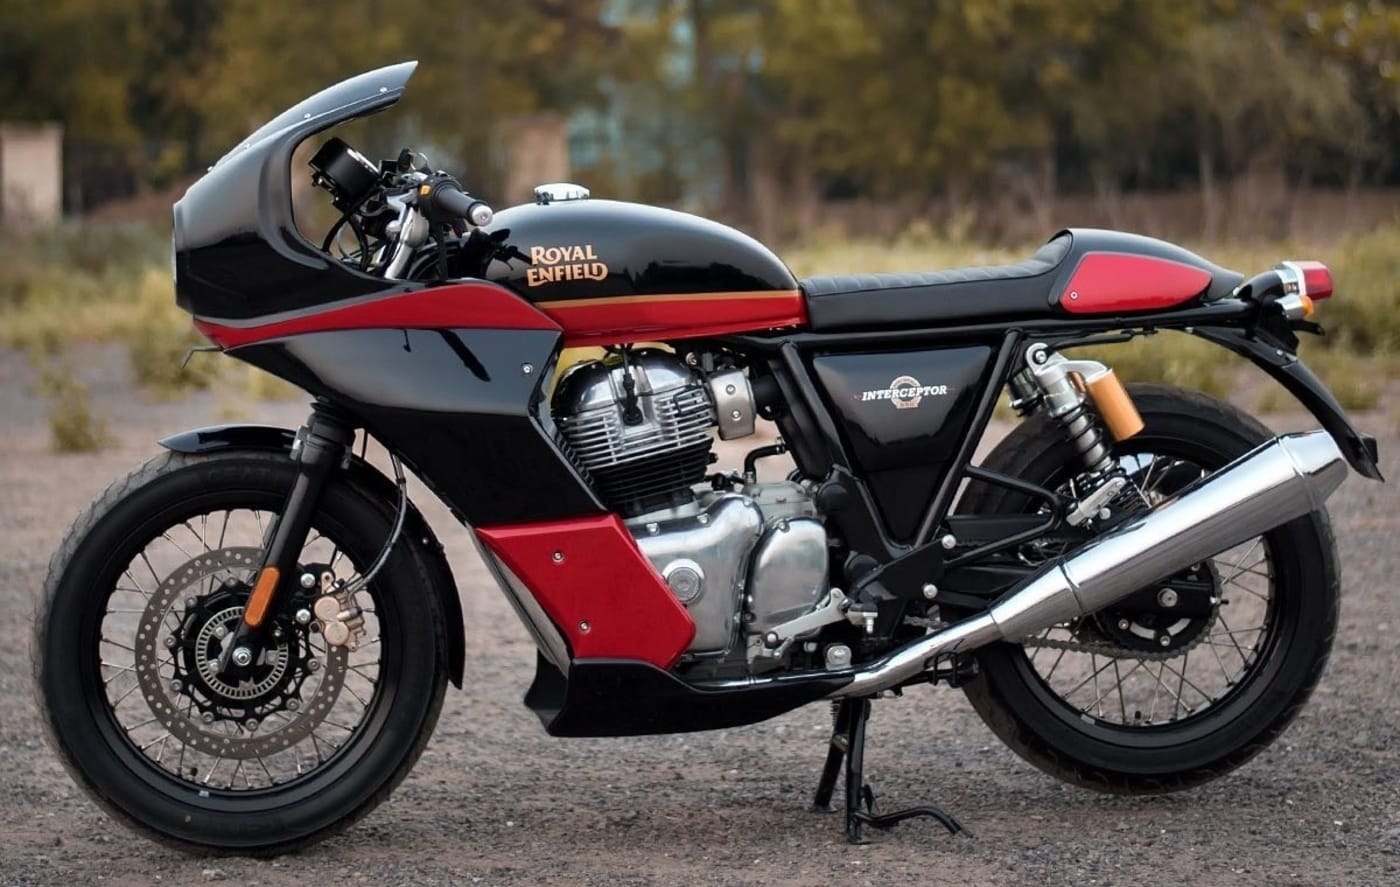 Updated RE Continental GT 650 & Semi-Faired GT Likely Coming Soon